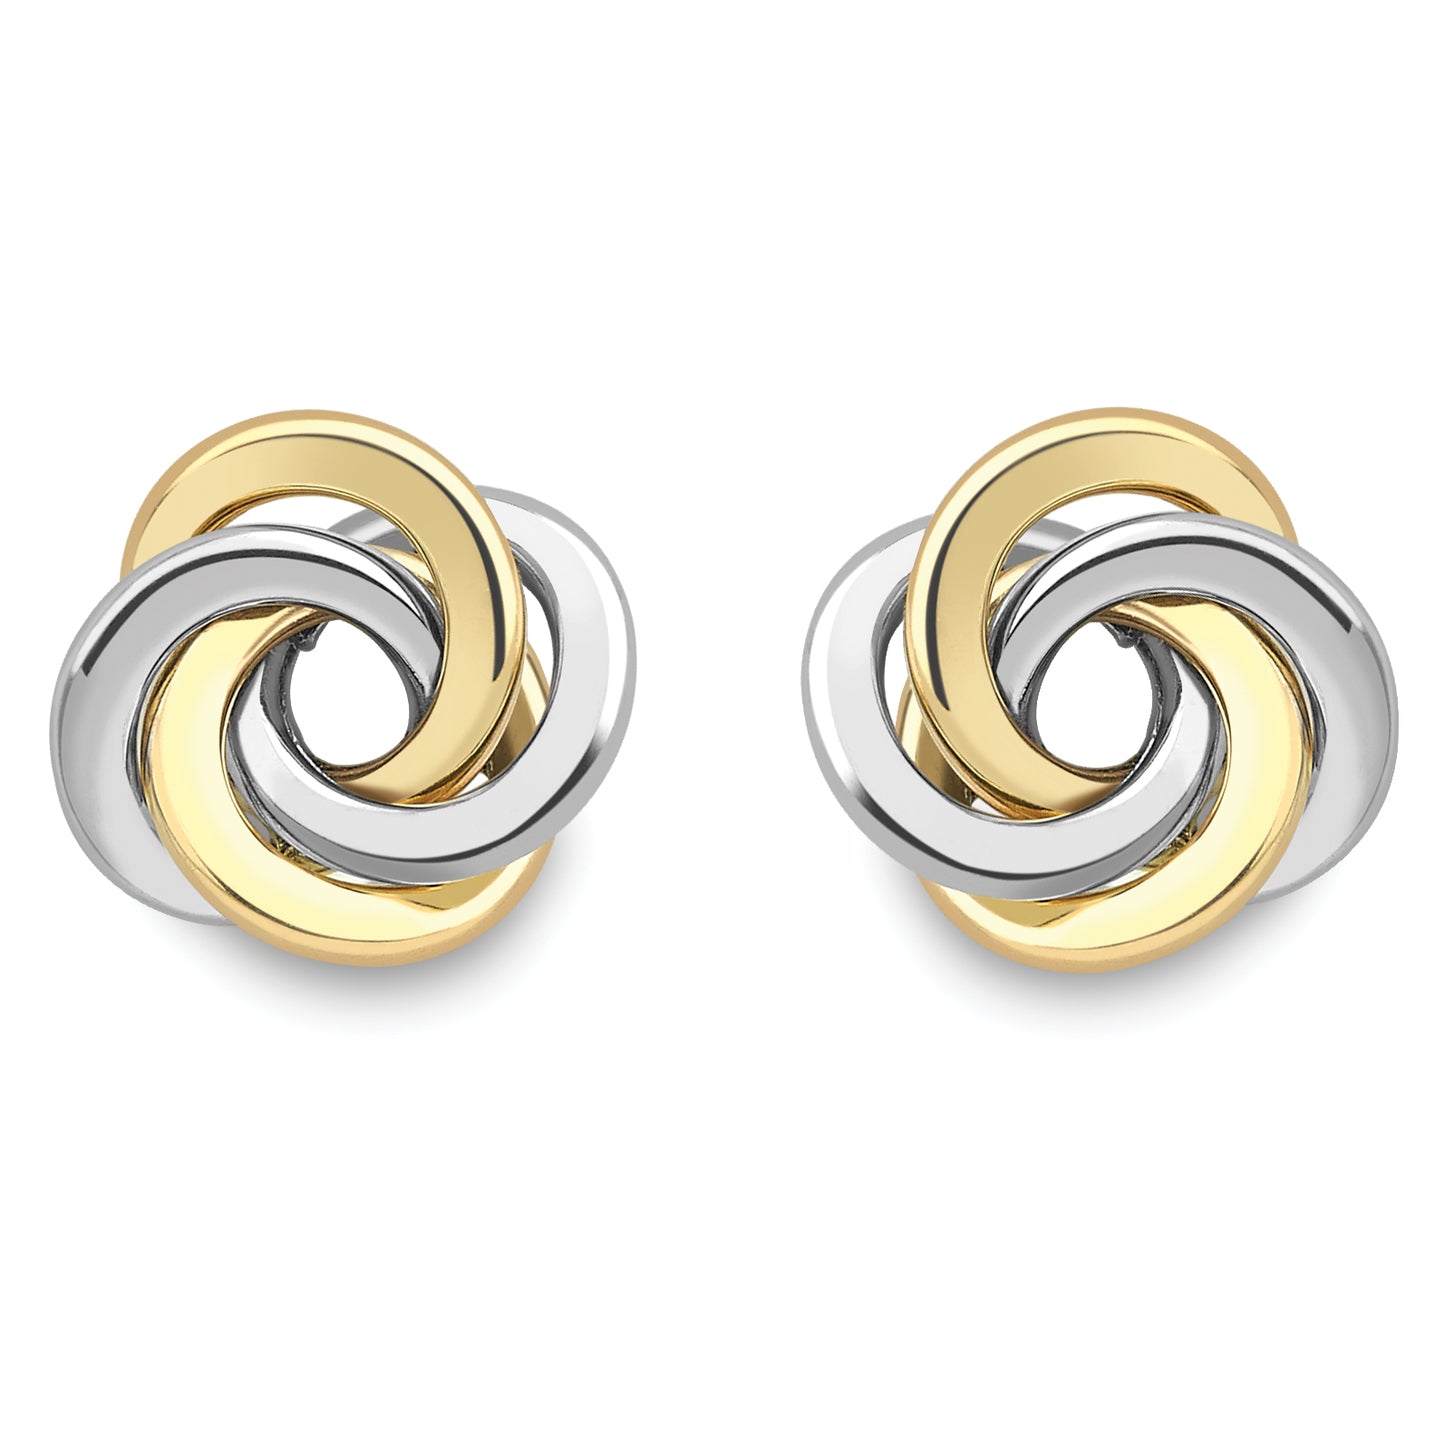 9ct White & Yellow Gold  Whirlpool Knot Stud Earrings - ERNR02123